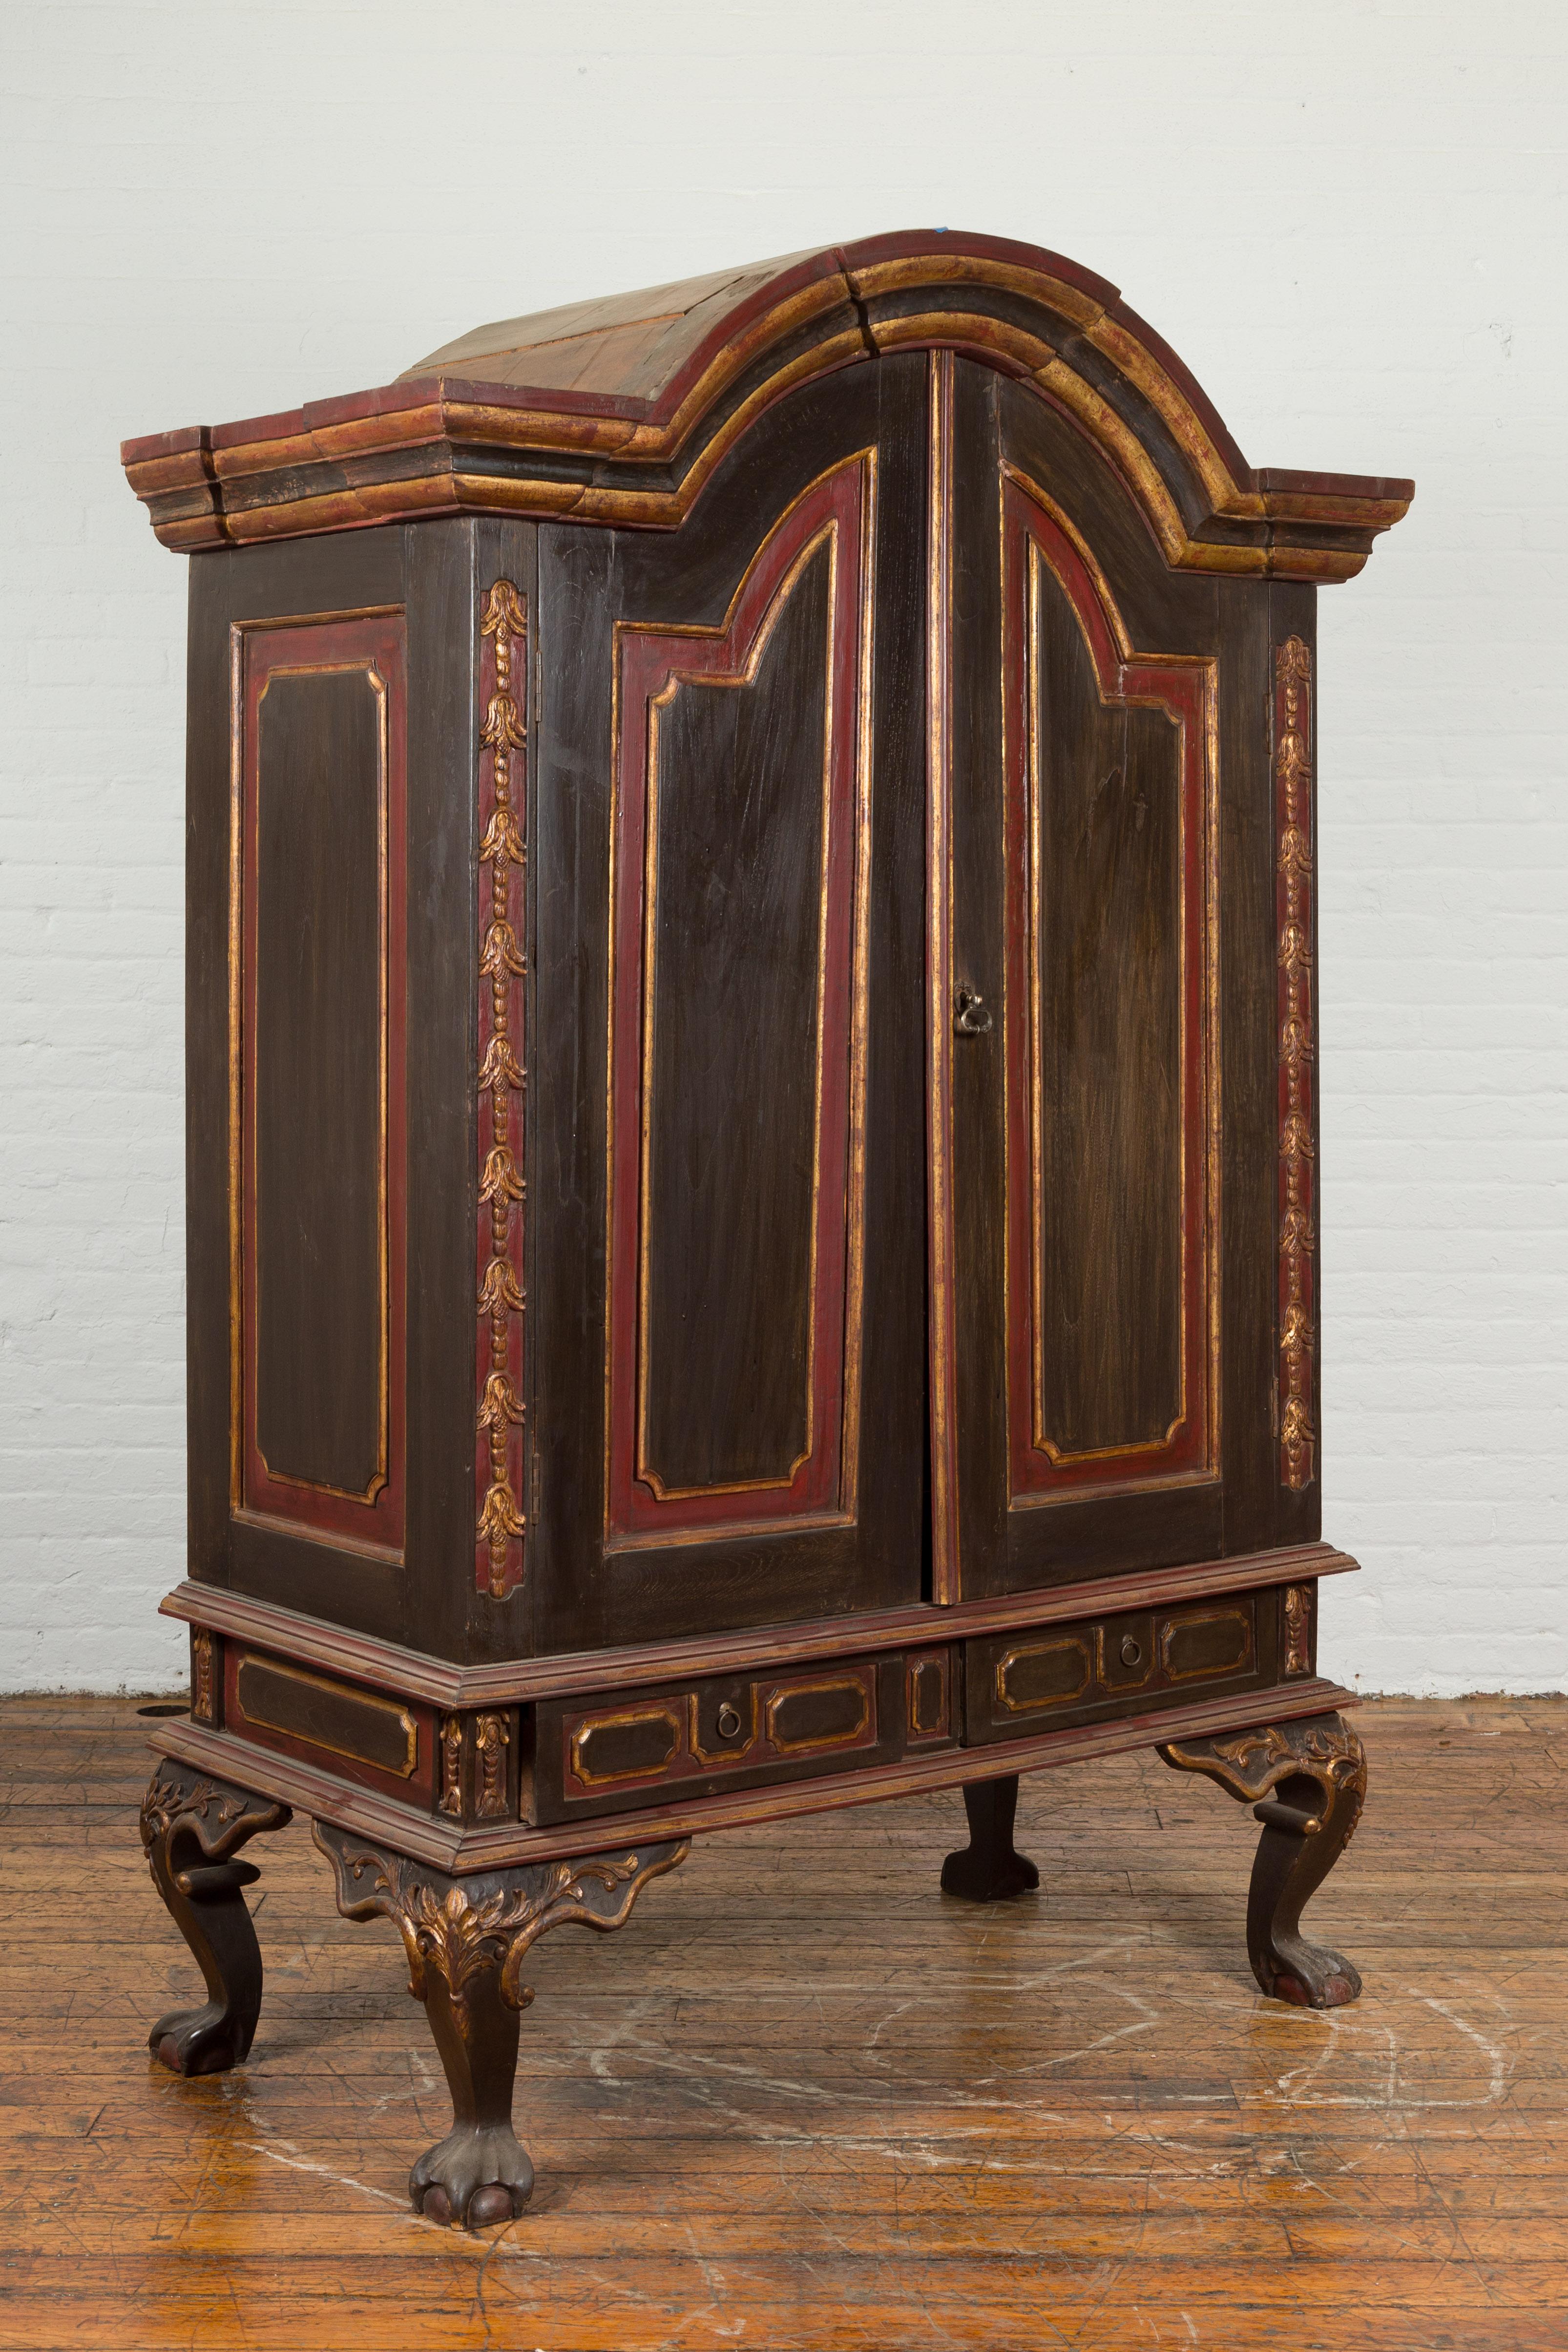 A Dutch Colonial period Indonesian hutch cabinet from the early 20th century, with bonnet top, shelves, drawers and cabriole legs. Created in Indonesia at the turn of the century, this Dutch Colonial cabinet attracts our attention with its large